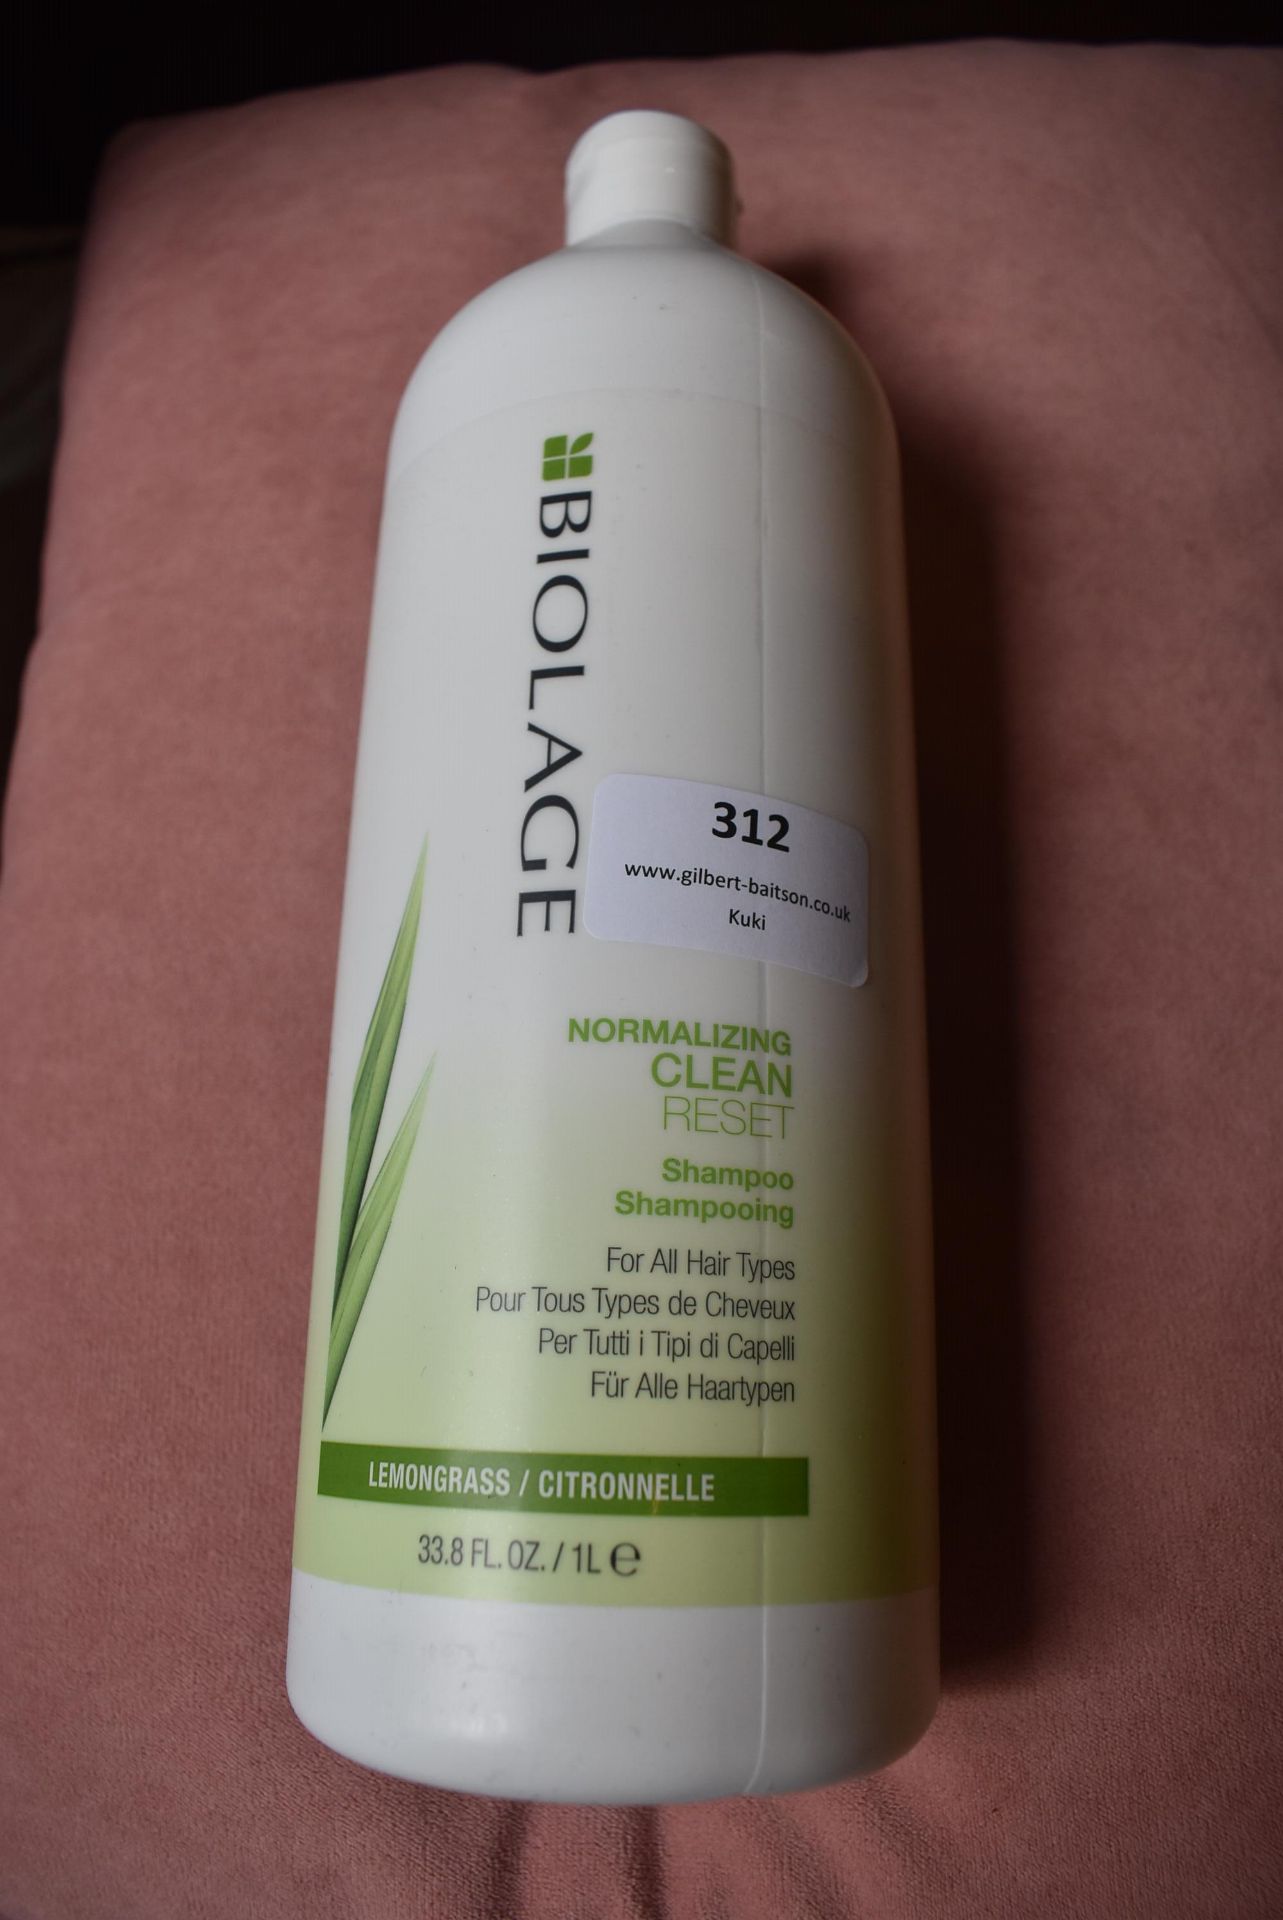 *1L of Biolage Normal Cleanse Reset Shampoo